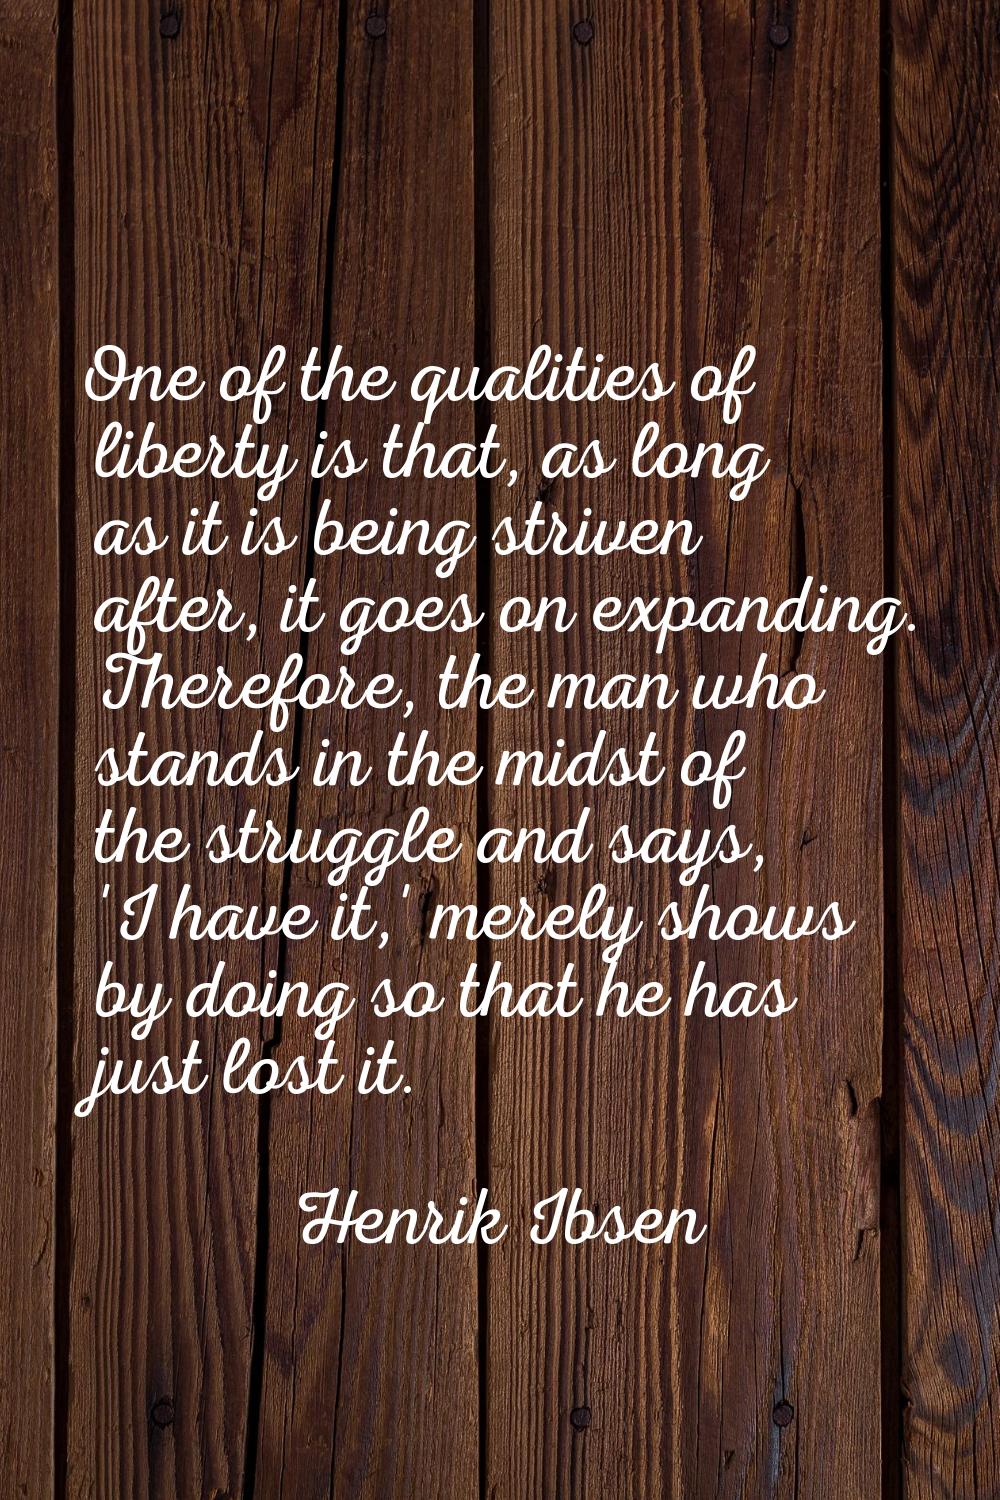 One of the qualities of liberty is that, as long as it is being striven after, it goes on expanding